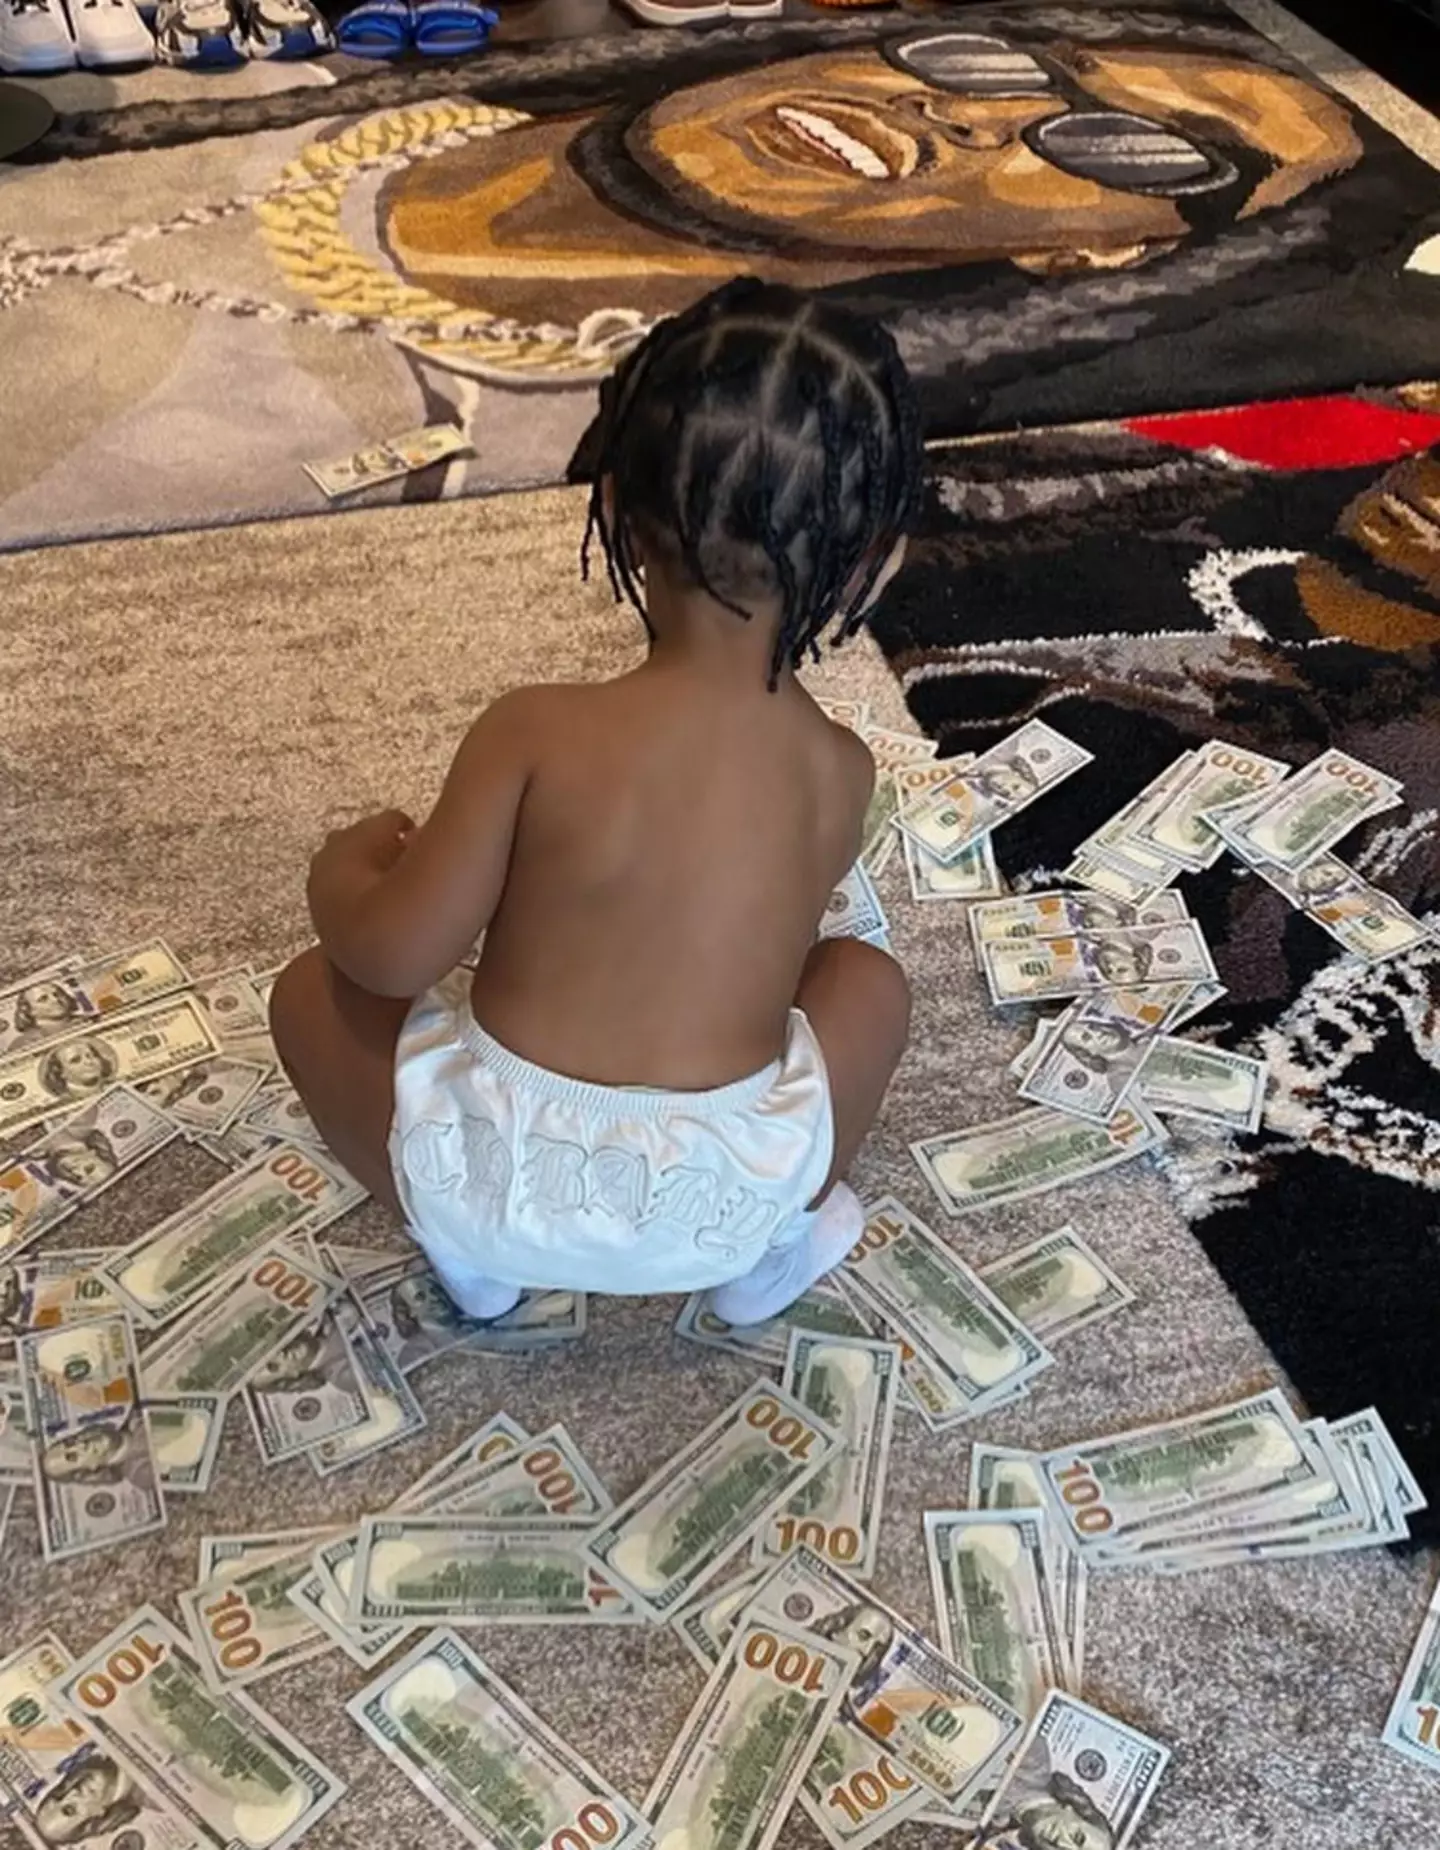 The toddler was playing with thousands of dollars.